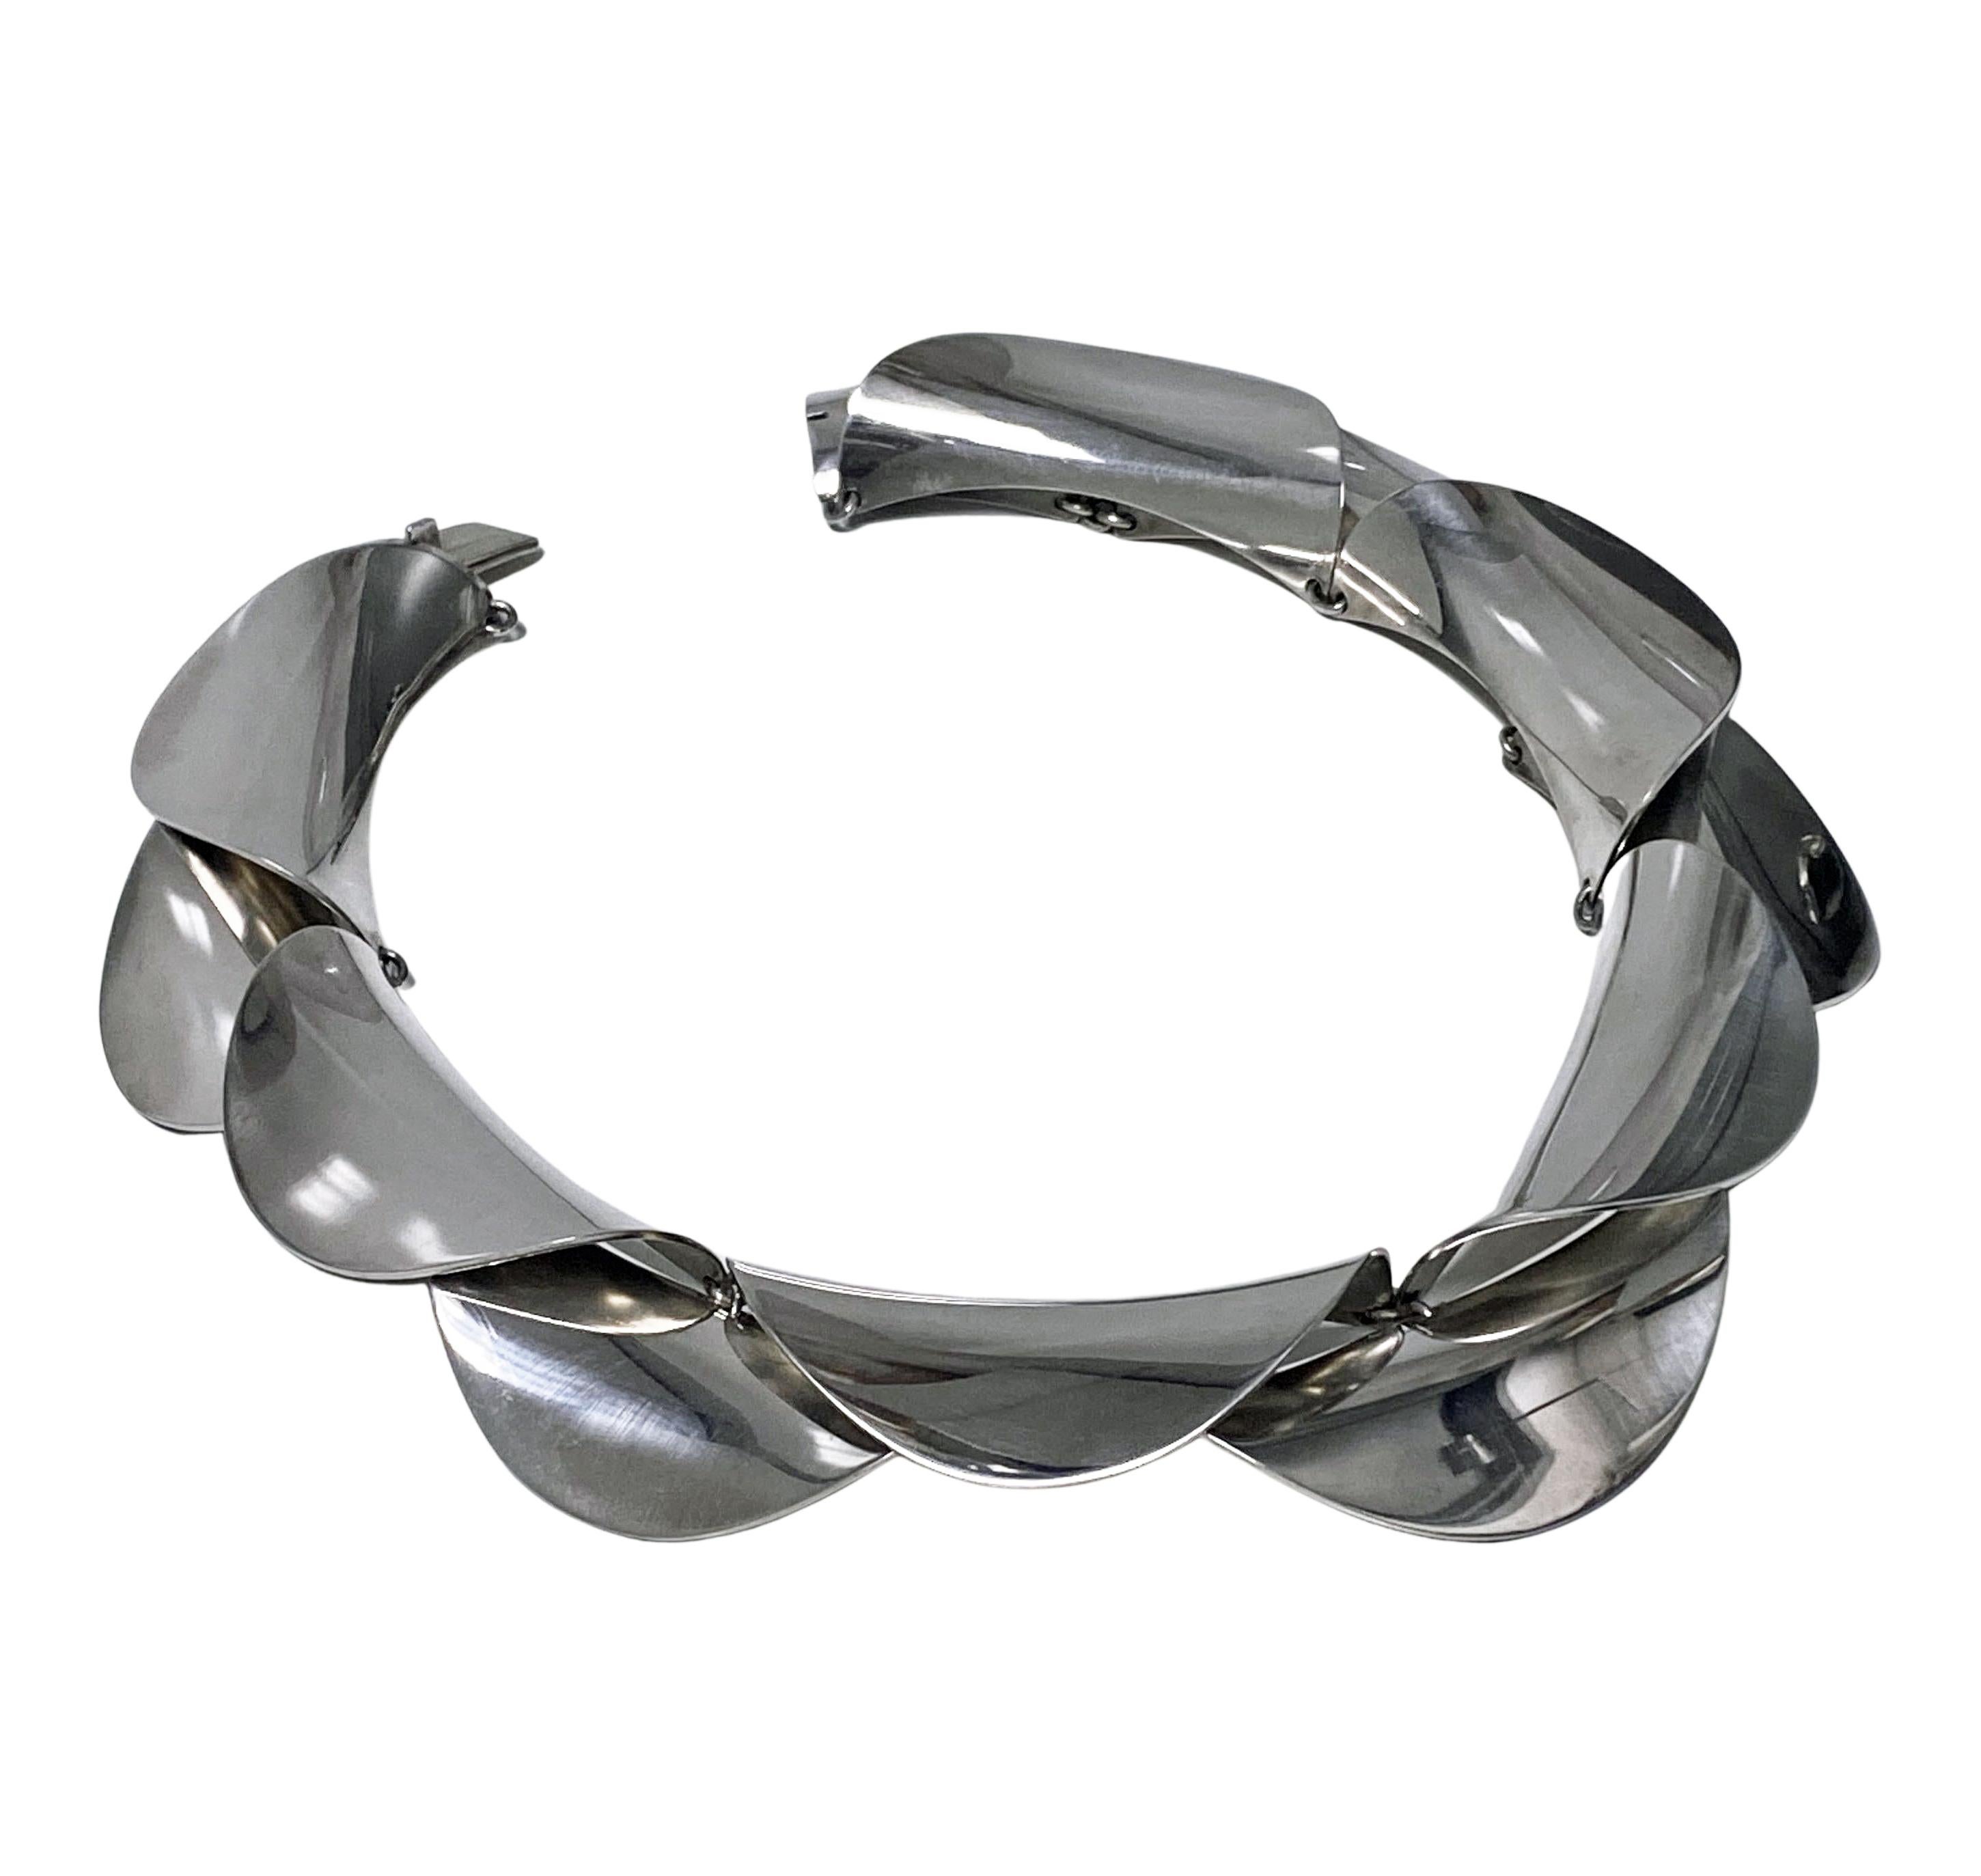 Very rare Nanna Ditzel Georg Jensen Sterling collar Necklace, C.1965. Composed of a series of overlapping curved semi-circular panels Signed Georg Jensen and No. 129 with designer's mark NJ for Nanna and Jorgen Ditzel. Item Weight: 170 grams.